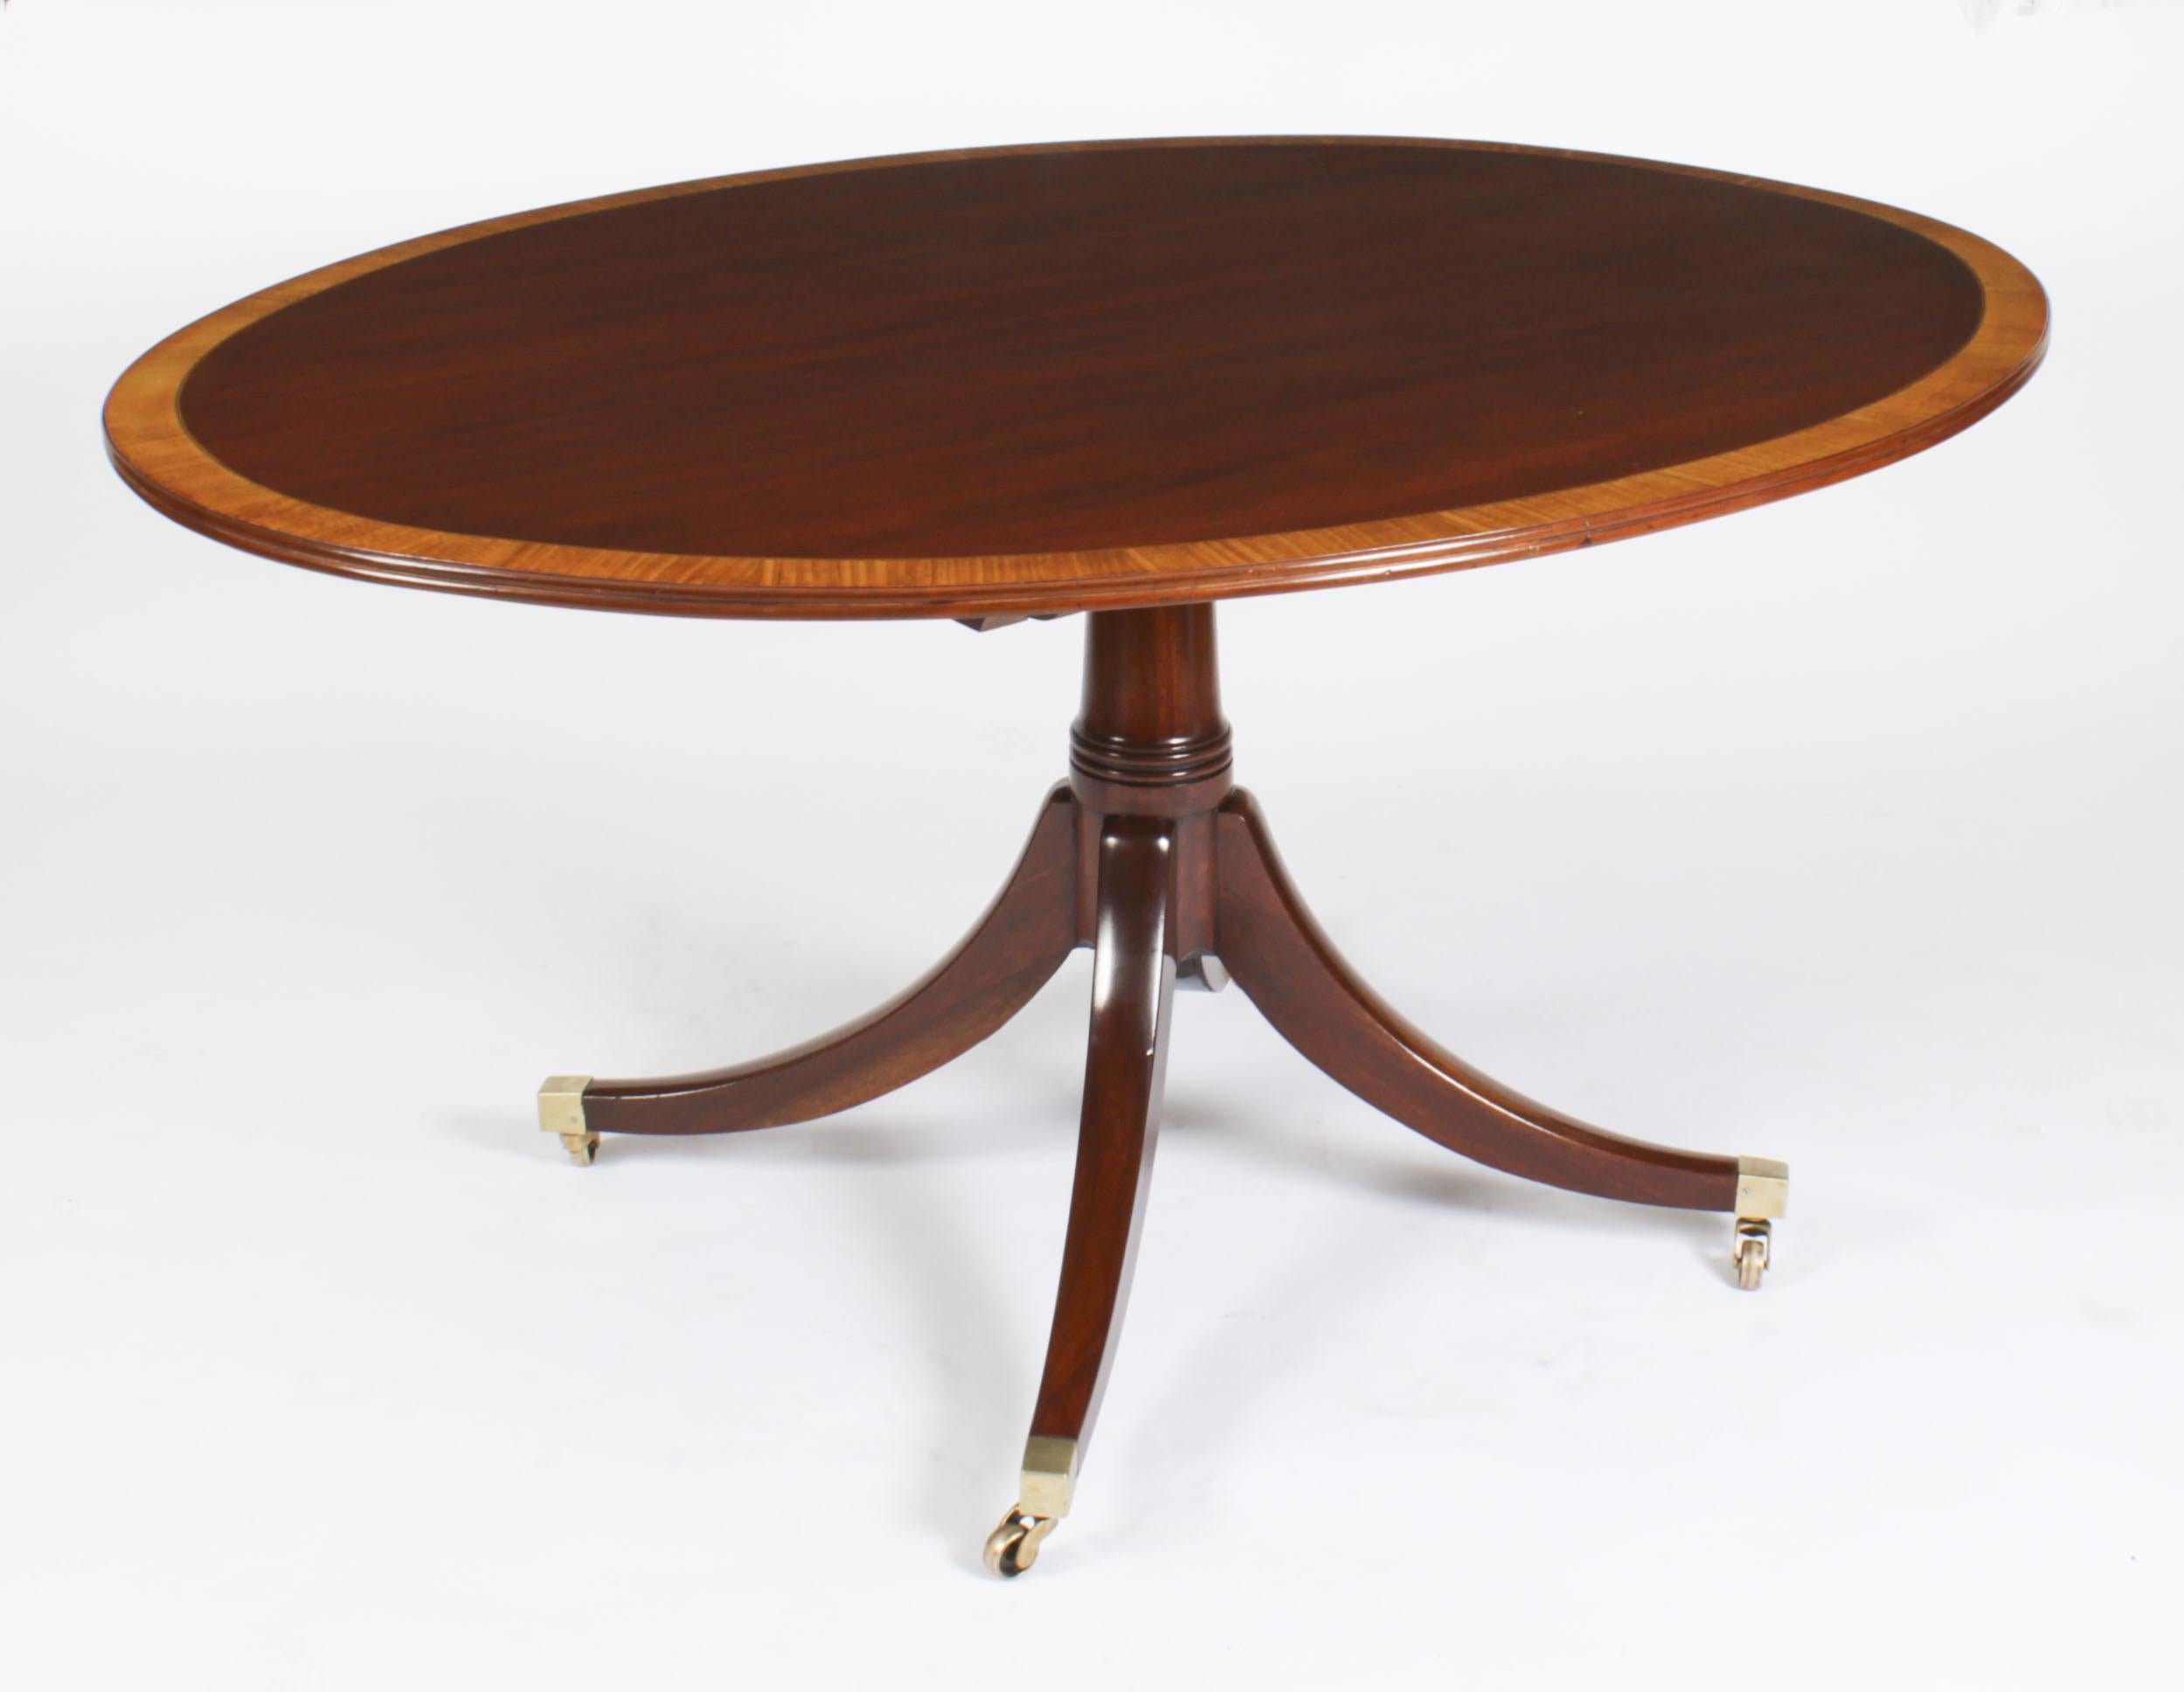 This is a beautiful antique Regency Revival flame mahogany and Satinwood banded oval dining table dating from circa 1900, with a matching set of six Regency Revival bar back dining chairs. 

The fabulous 5ft flame mahogany tilt top table can seat